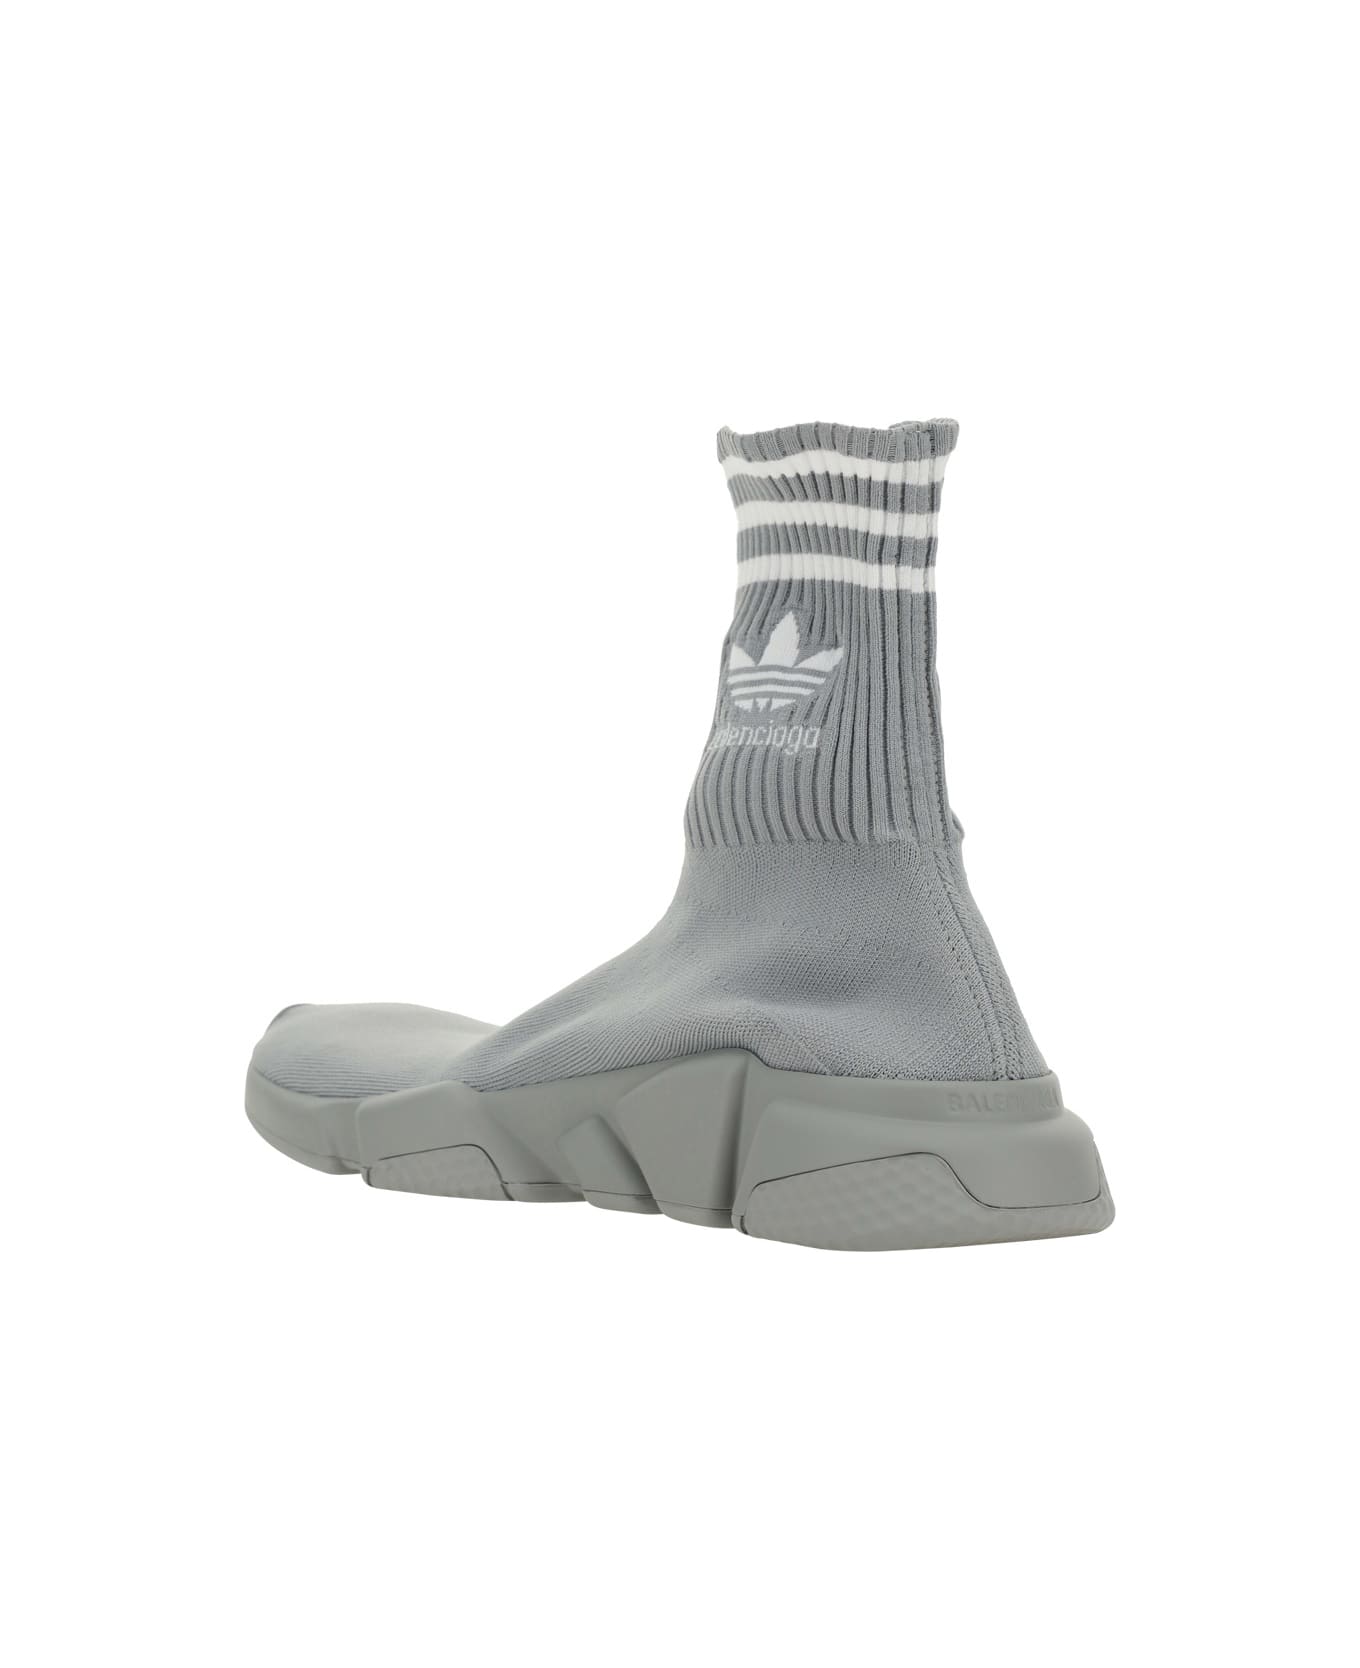 Balenciaga Speed Trainers Knitted Sock-sneakers - Grey スニーカー